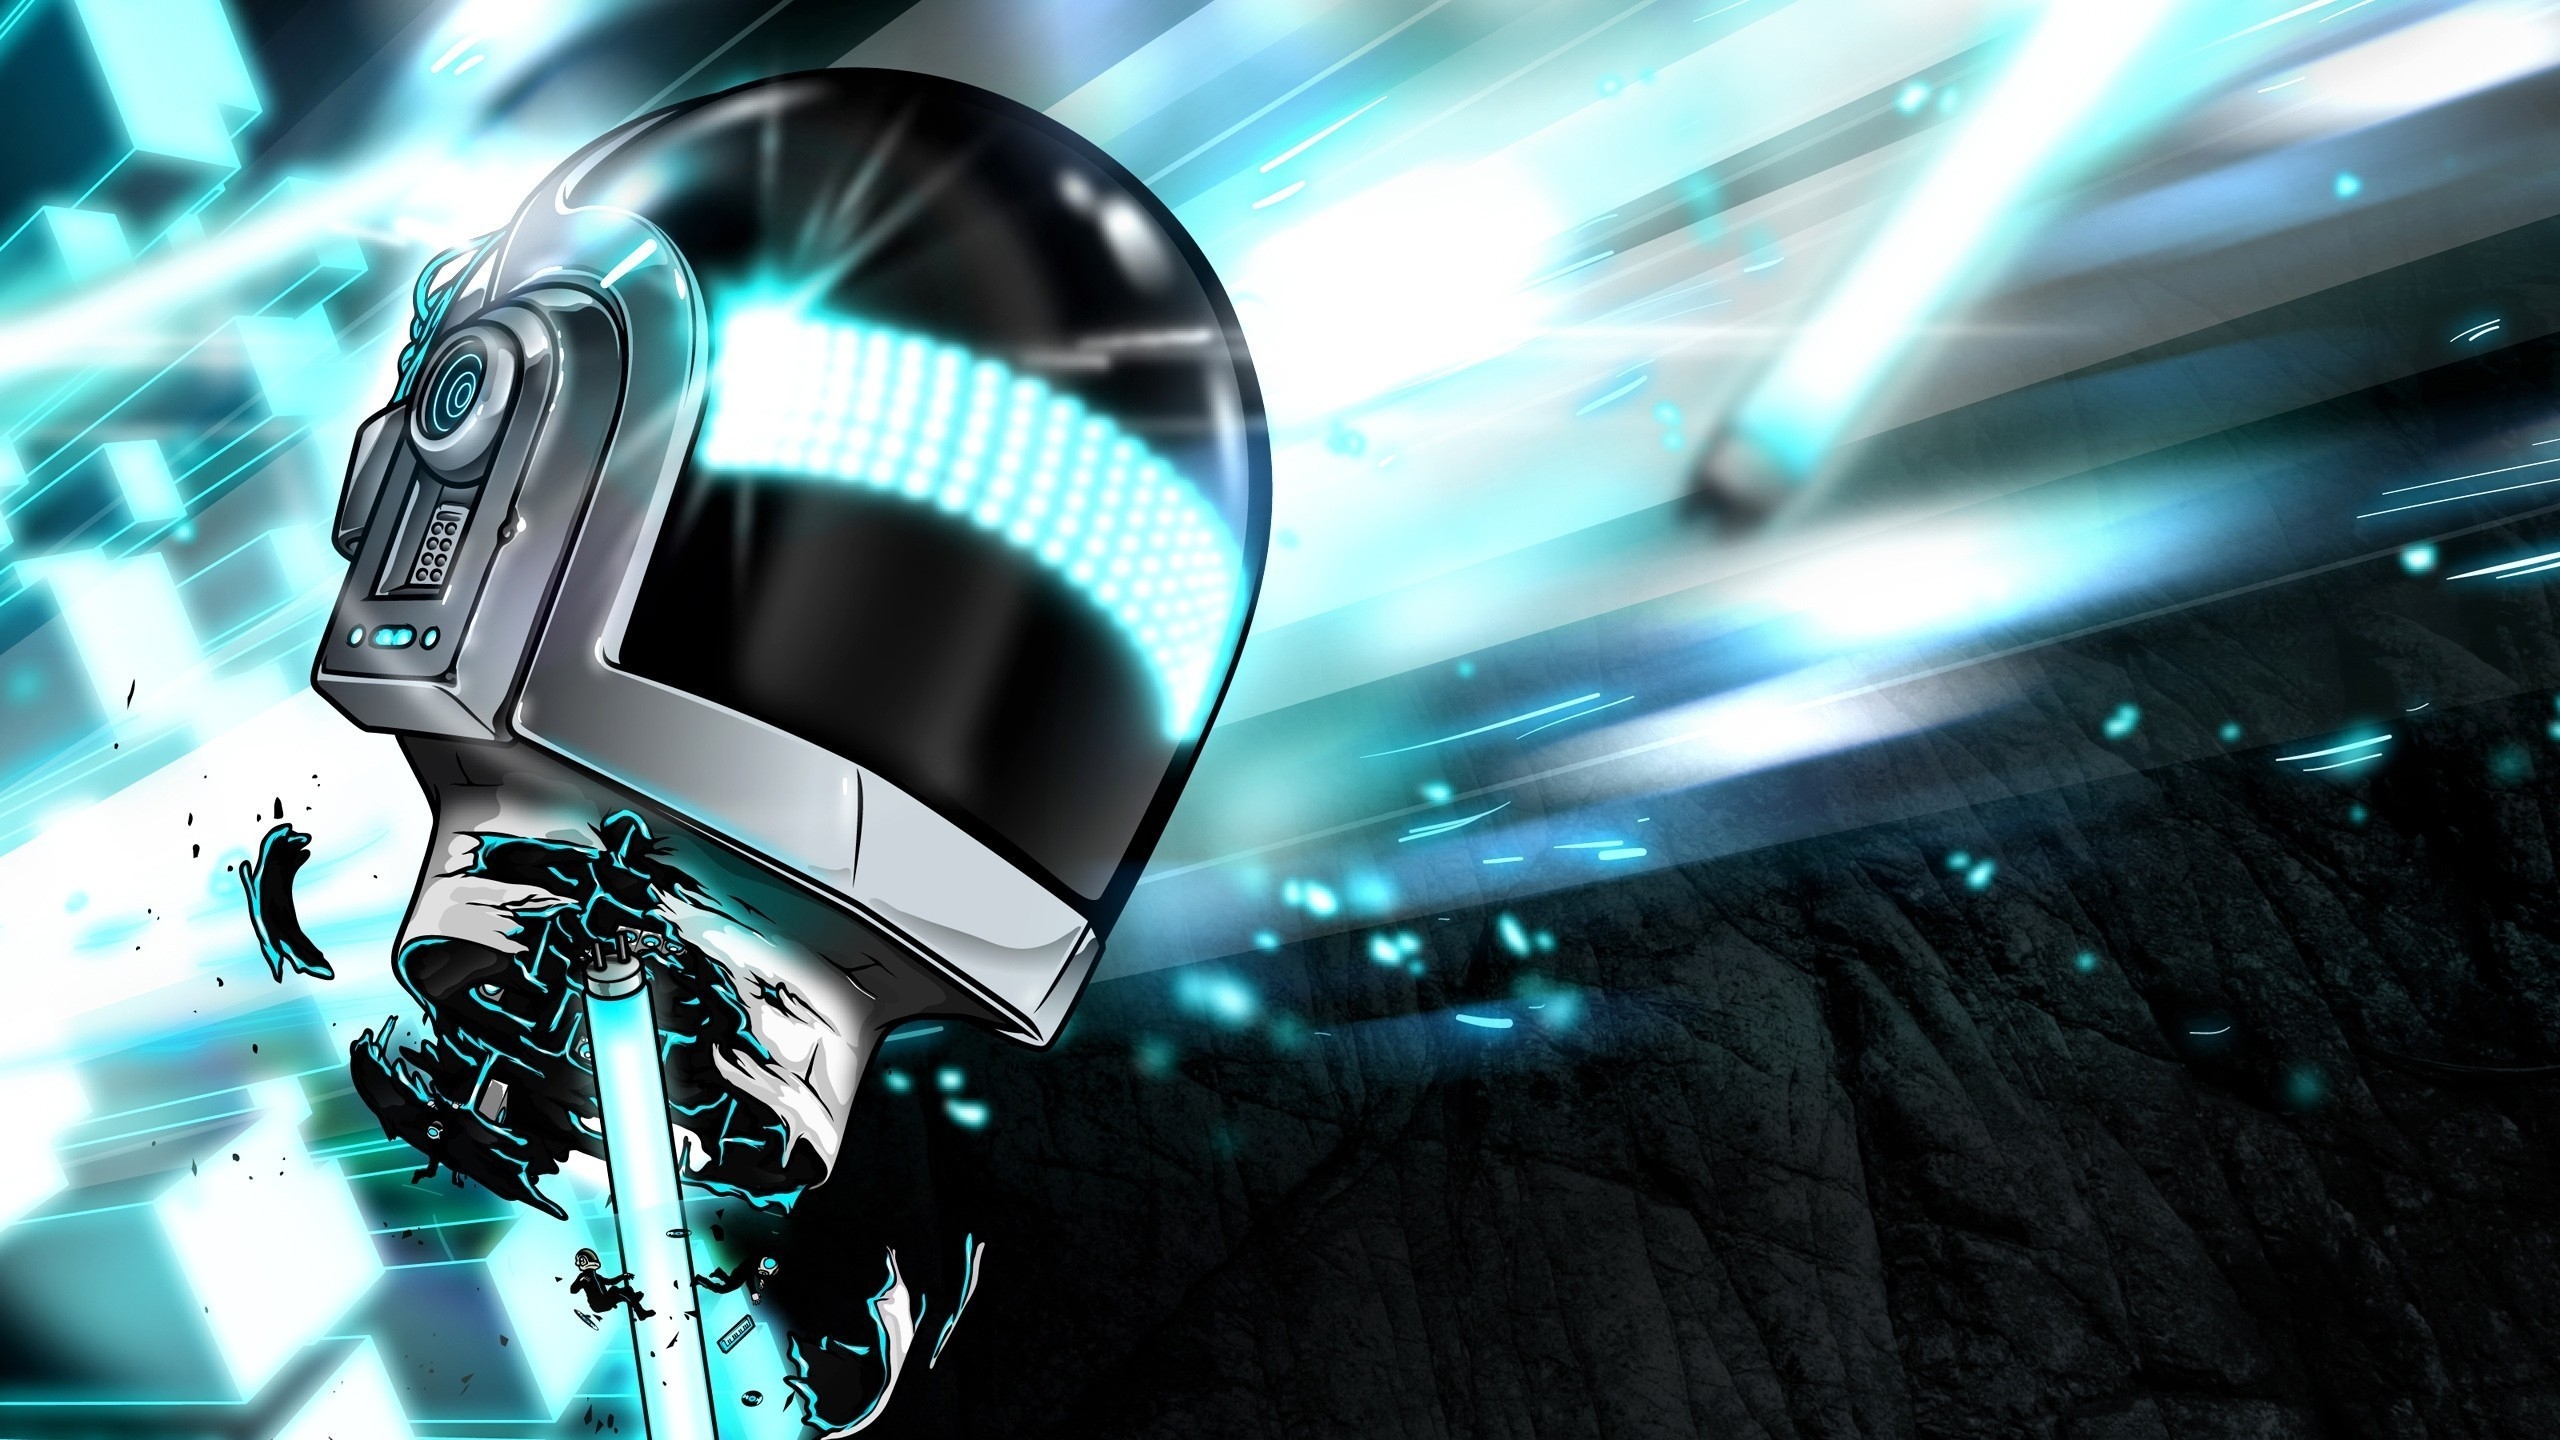 Cool Daft Punk for 2560x1440 HDTV resolution